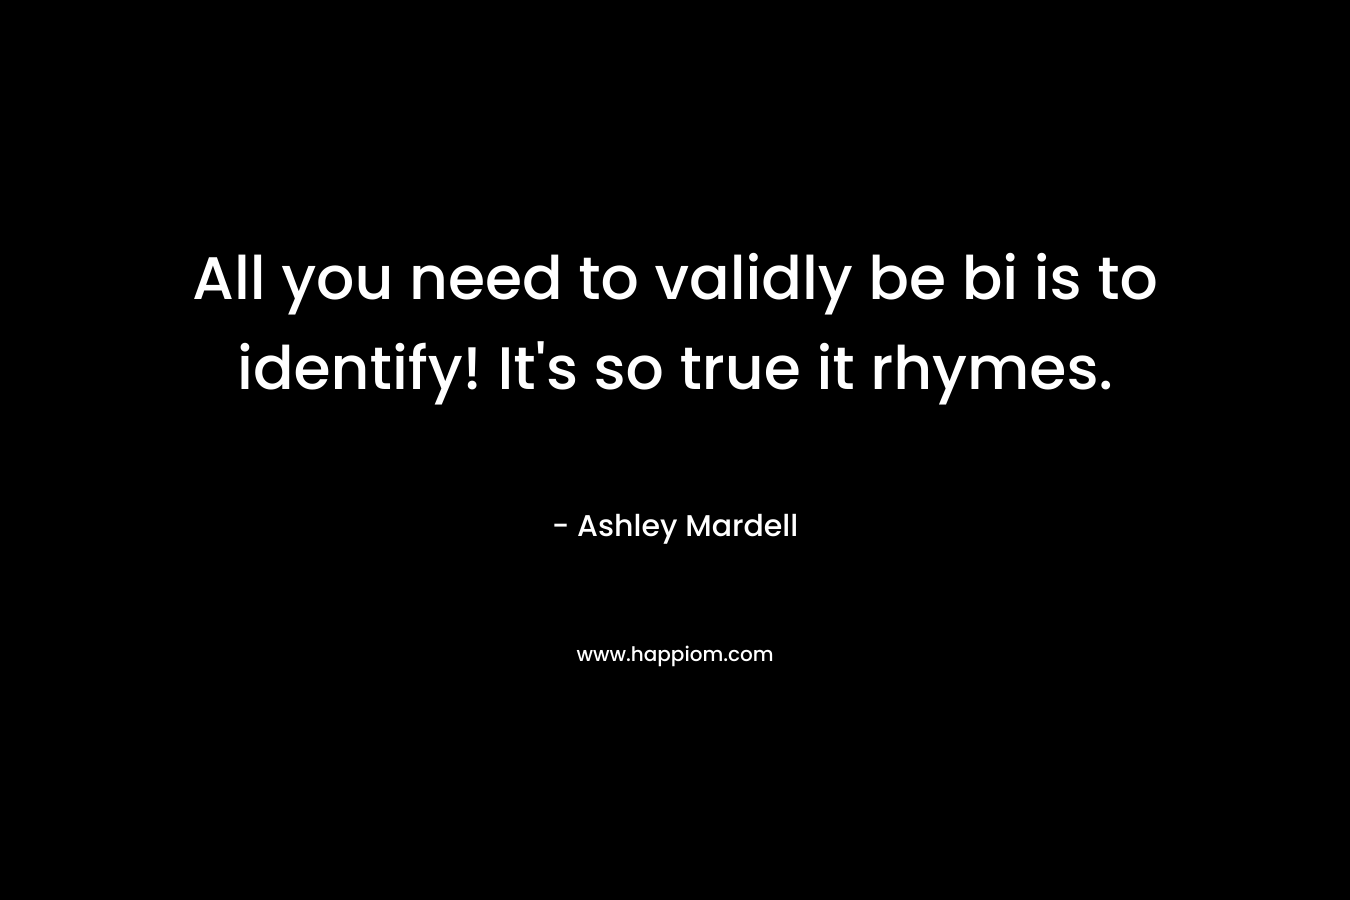 All you need to validly be bi is to identify! It’s so true it rhymes. – Ashley Mardell